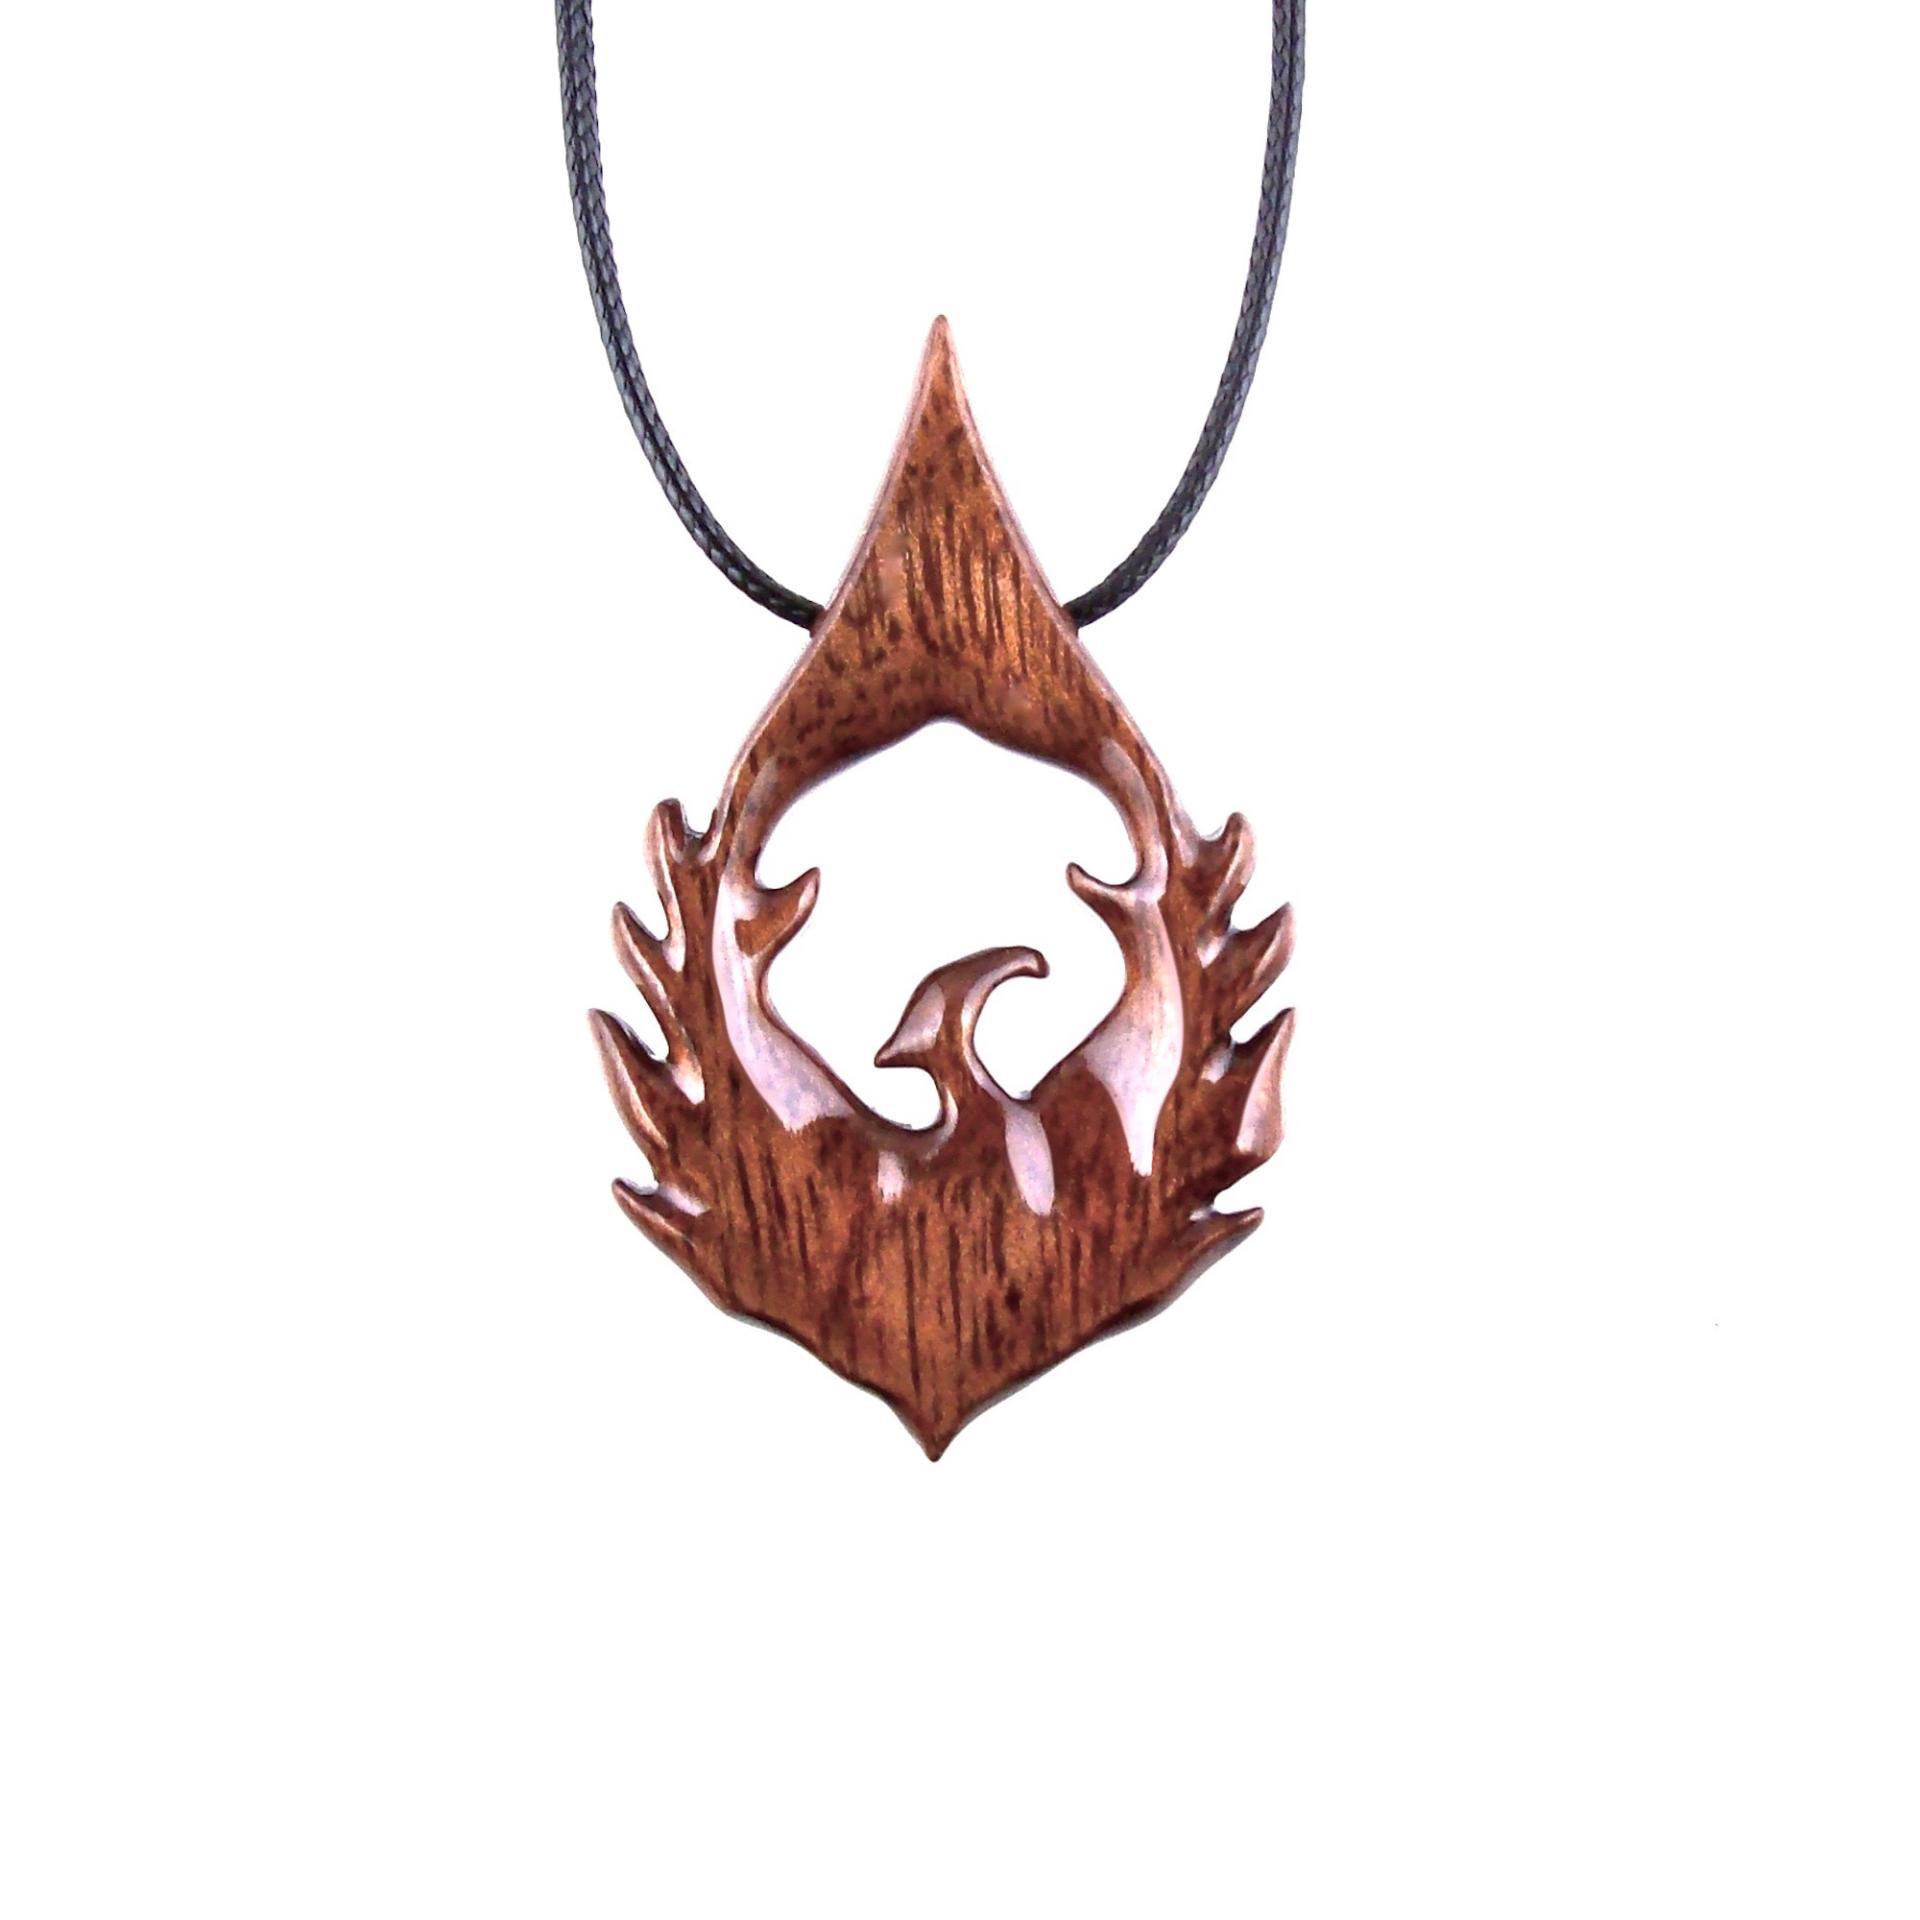 Hand Carved Wooden Phoenix Pendant Necklace, Fantasy Firebird Inspirational Wood Jewelry Gift for Him Her